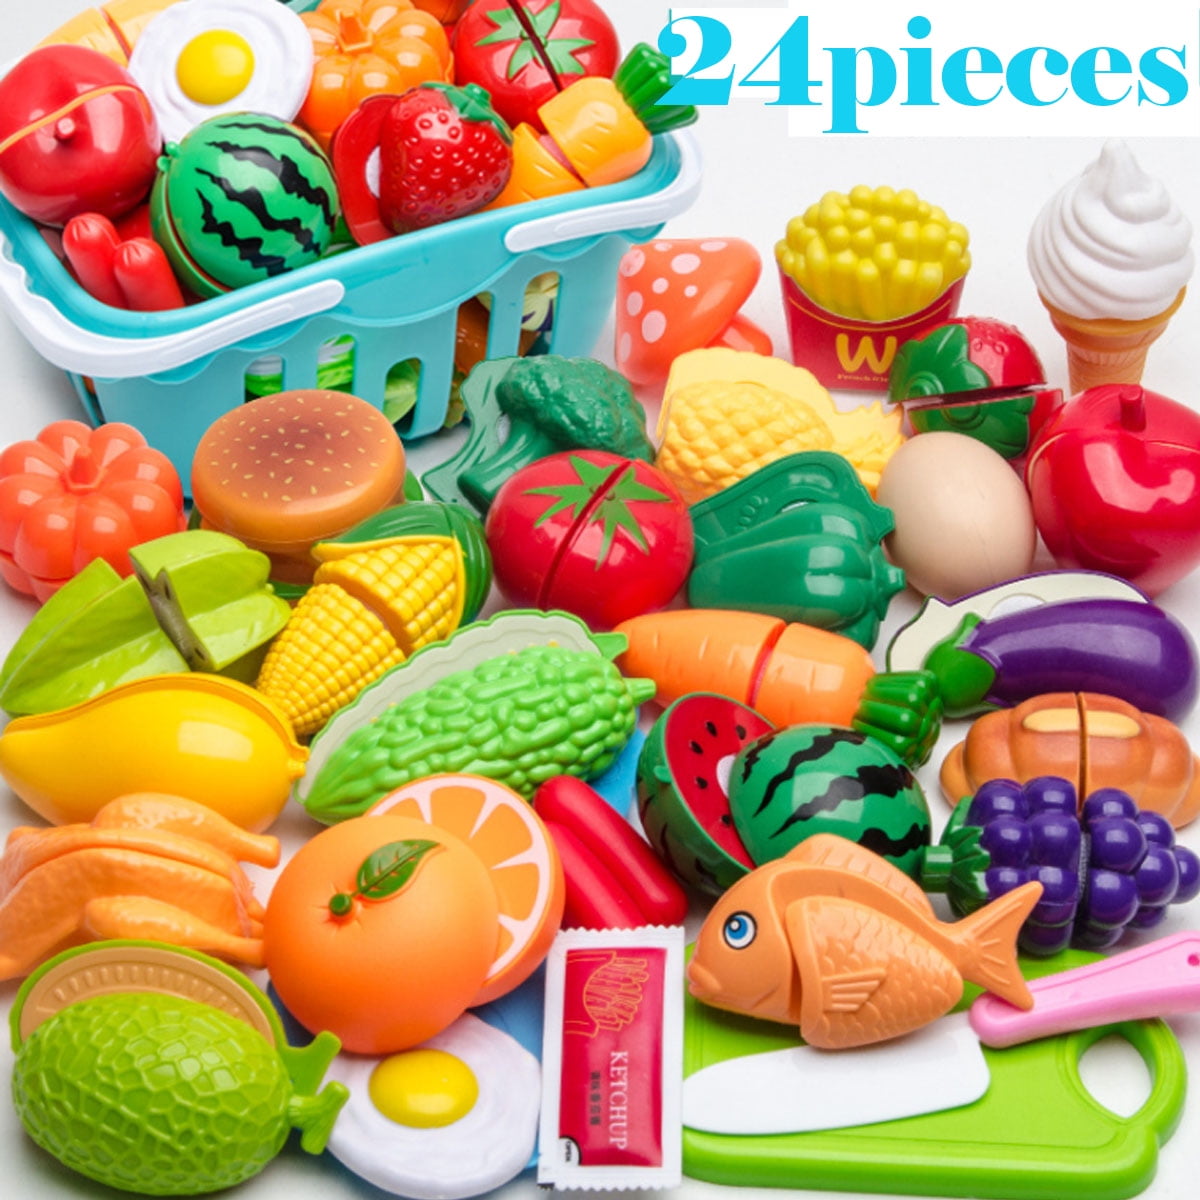 Play Food Kitchen Accessories Set for Kids Cutting Toy Fruits and Vegetables 